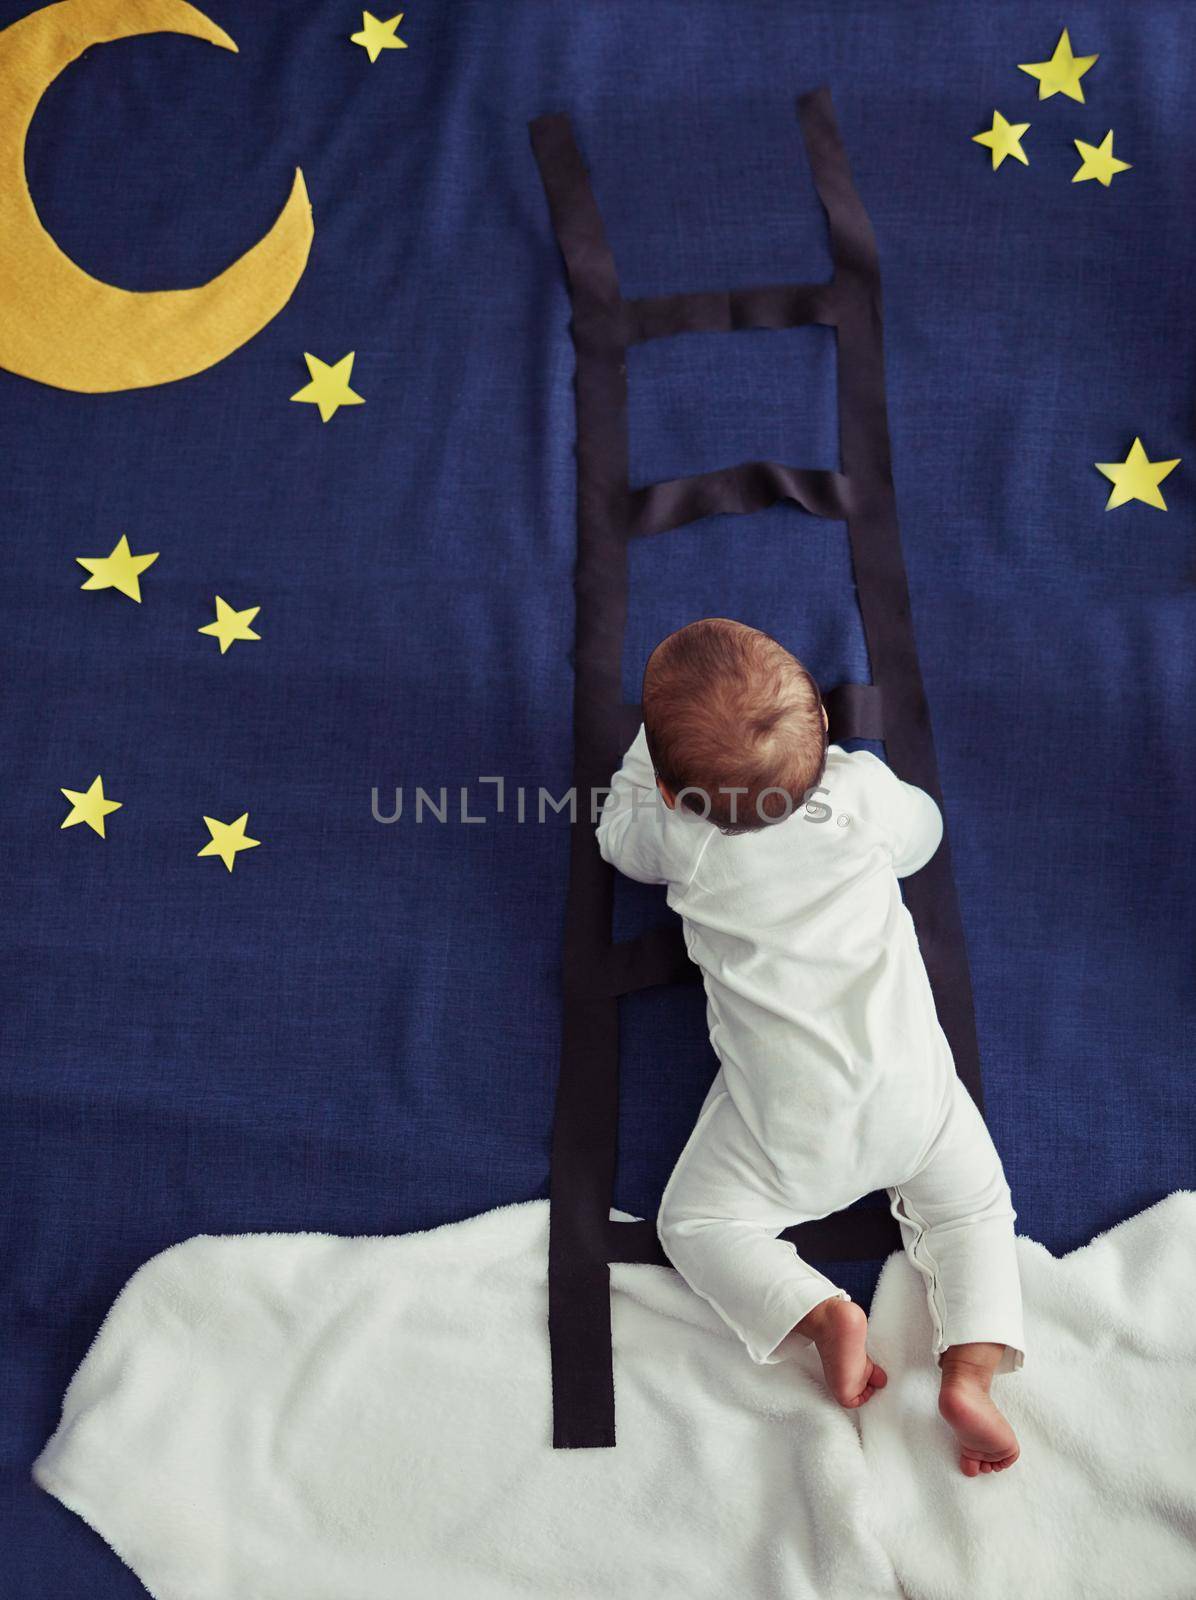 Concept shot of an adorable baby boy climbing a ladder against an imaginary night time background.